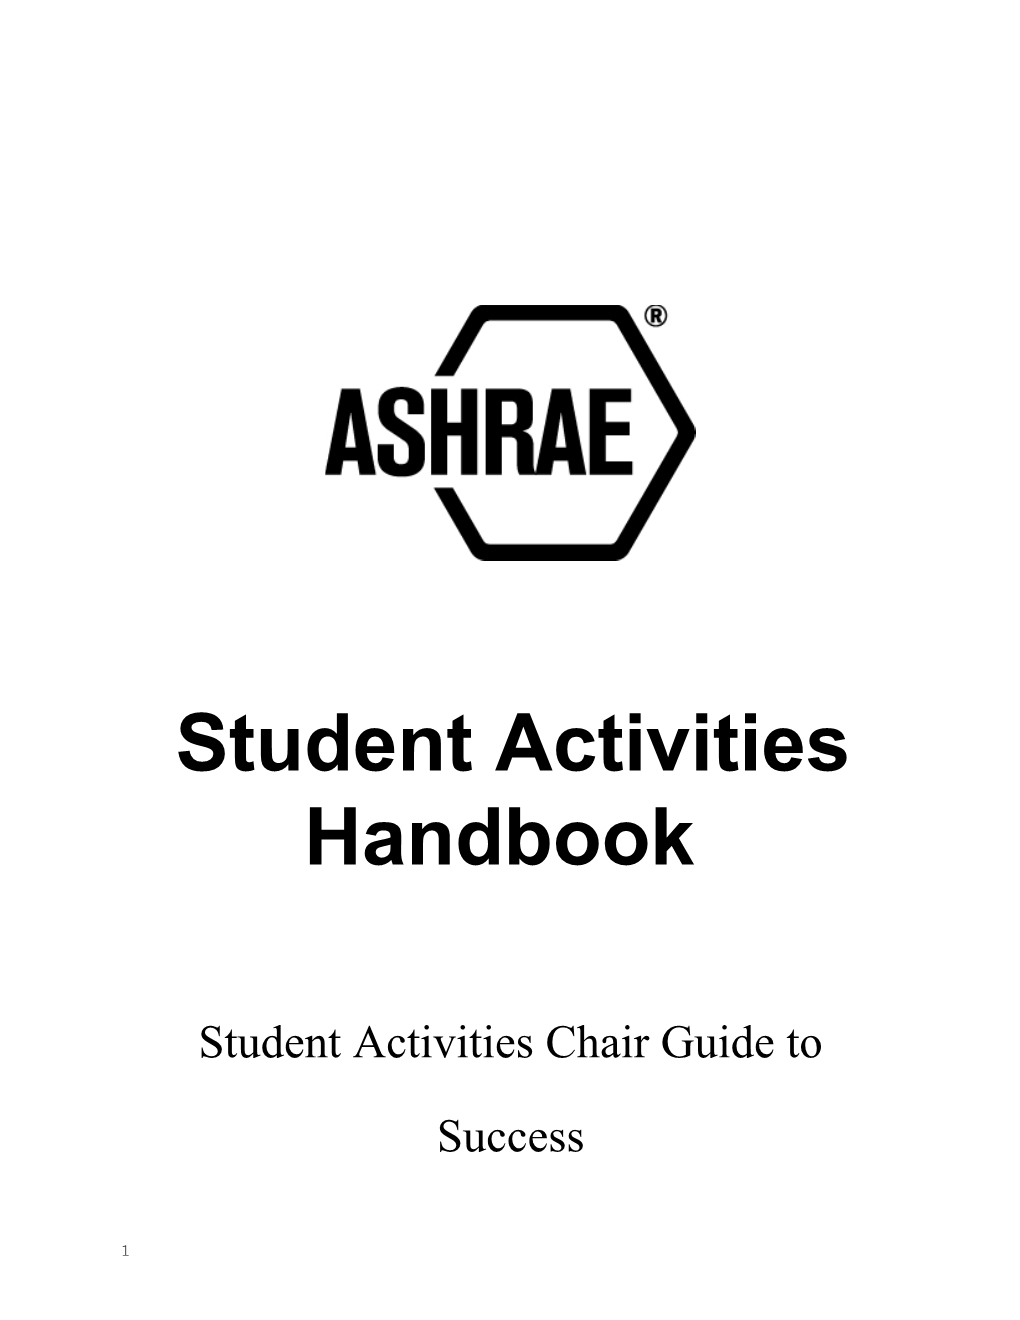 Student Activities Chair Guide to Success